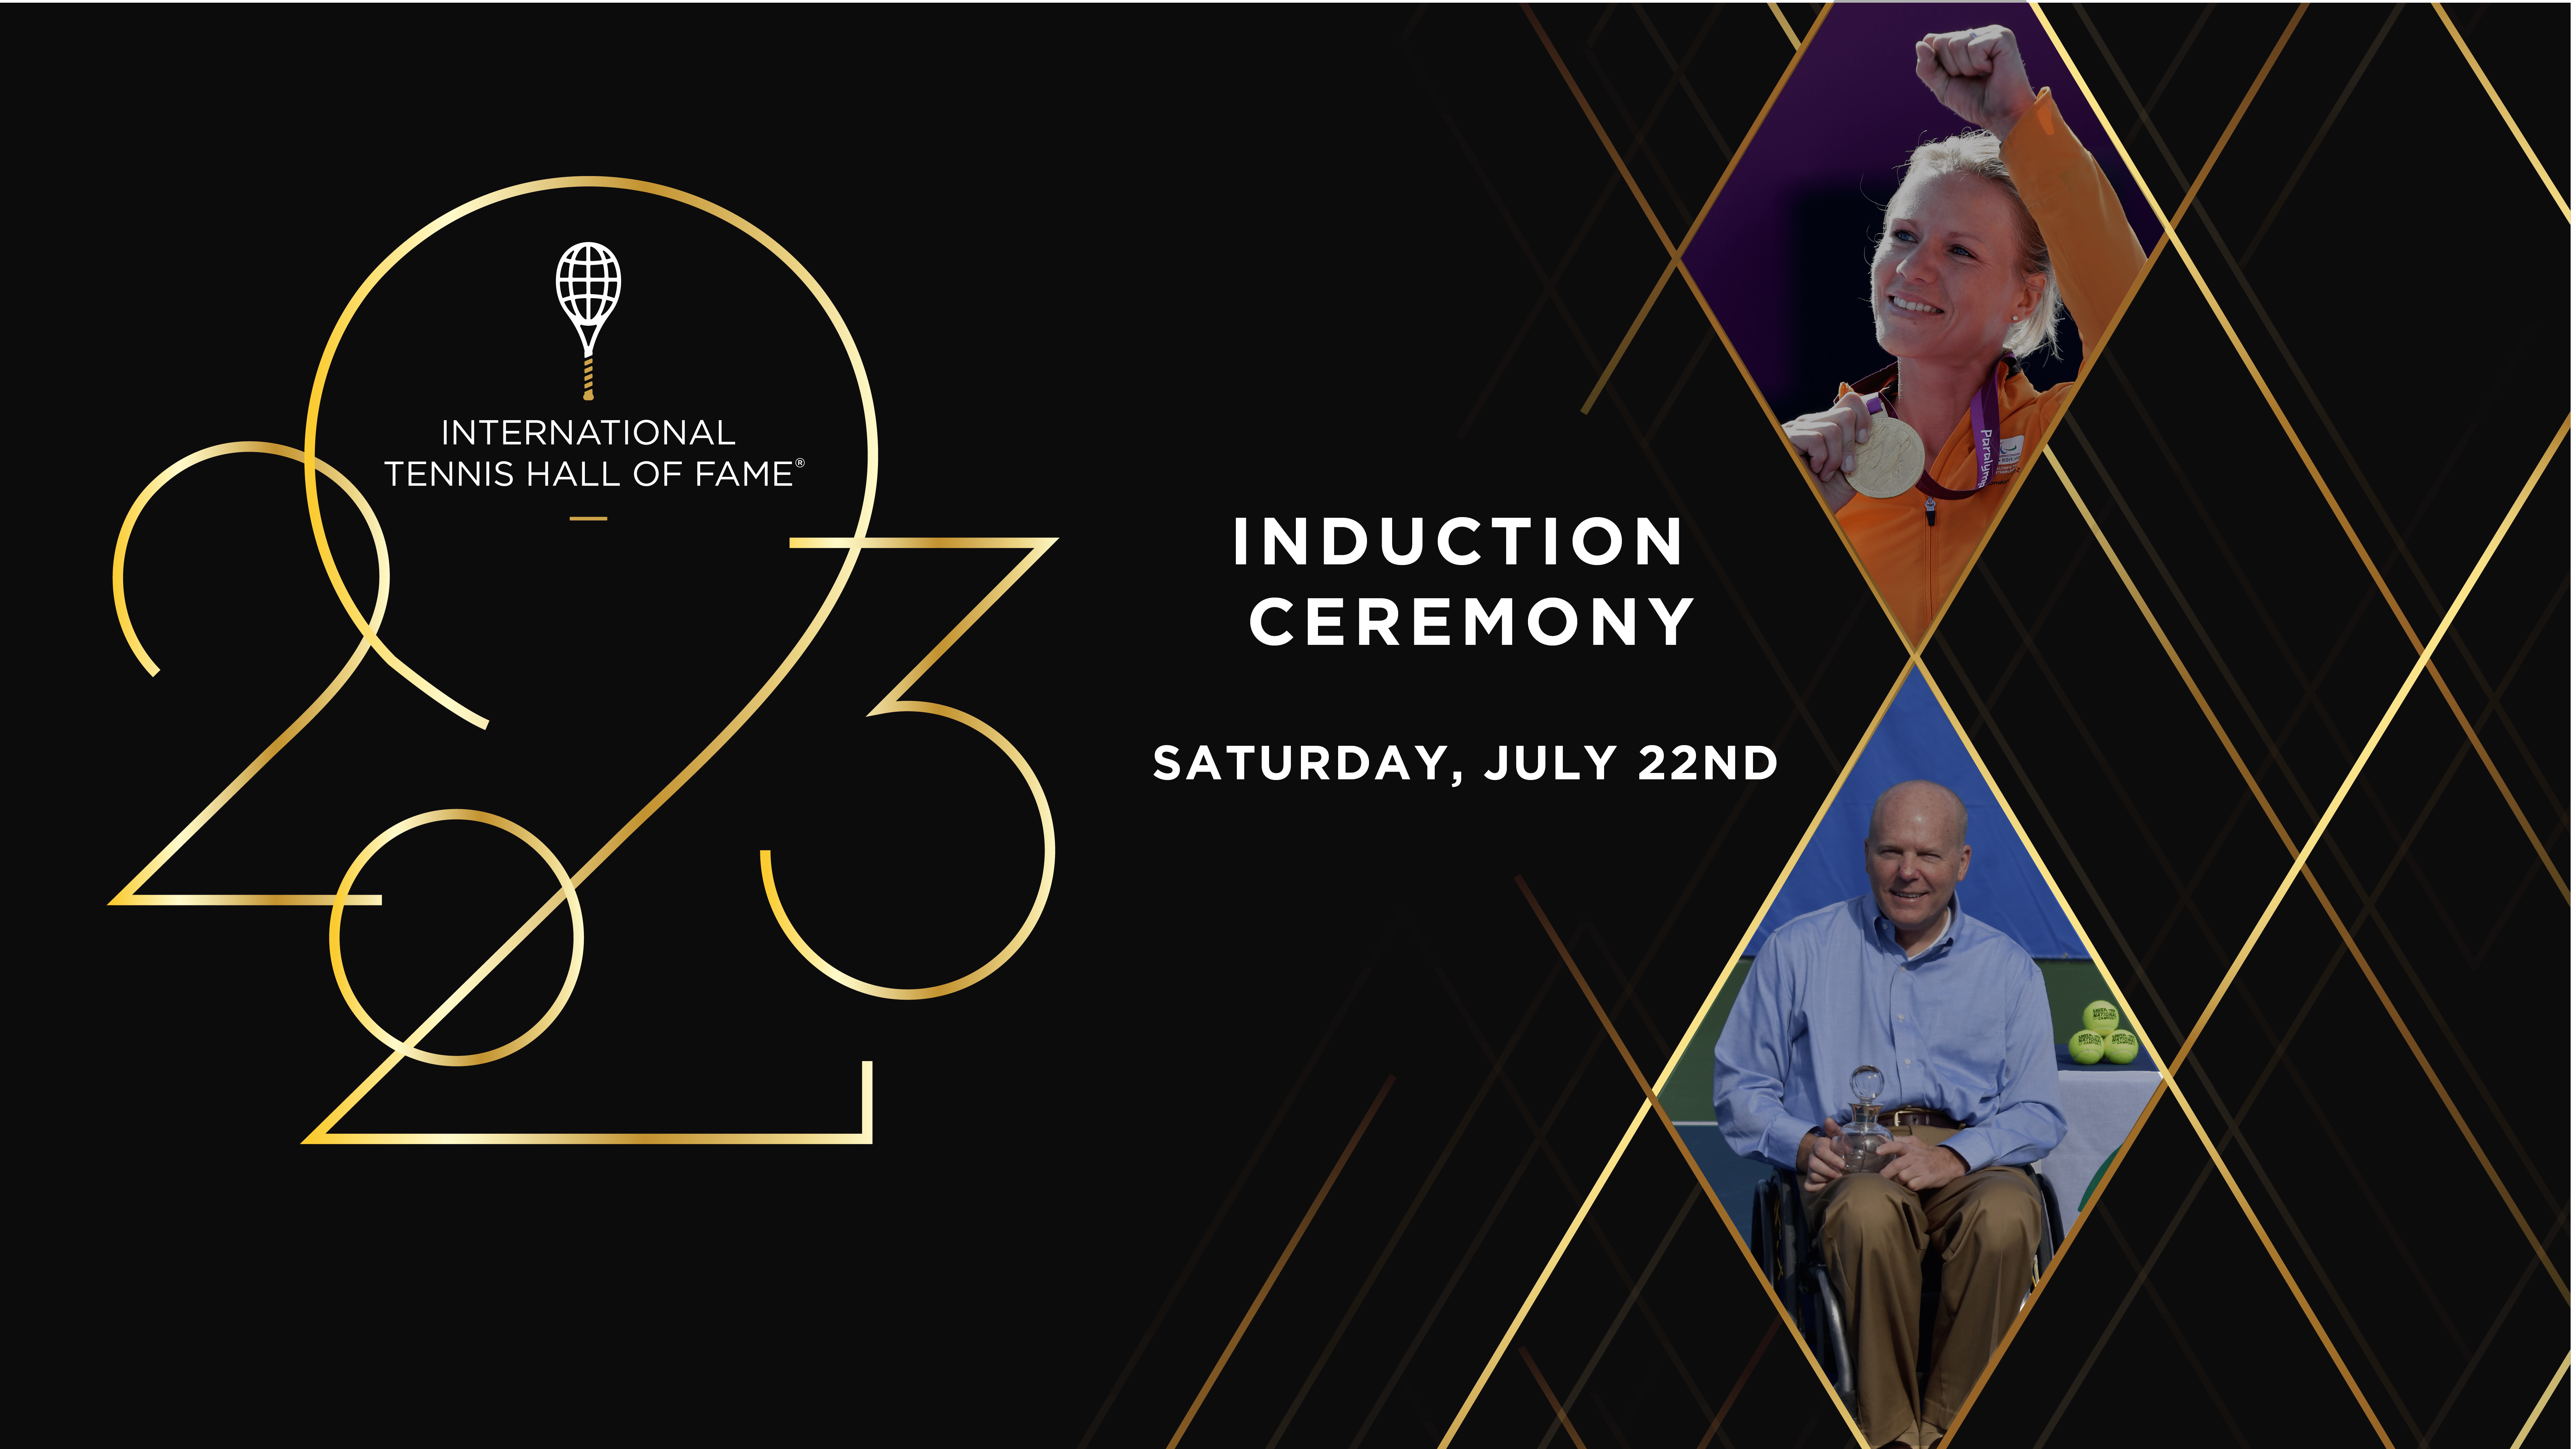 Induction Ceremony Ticket Image